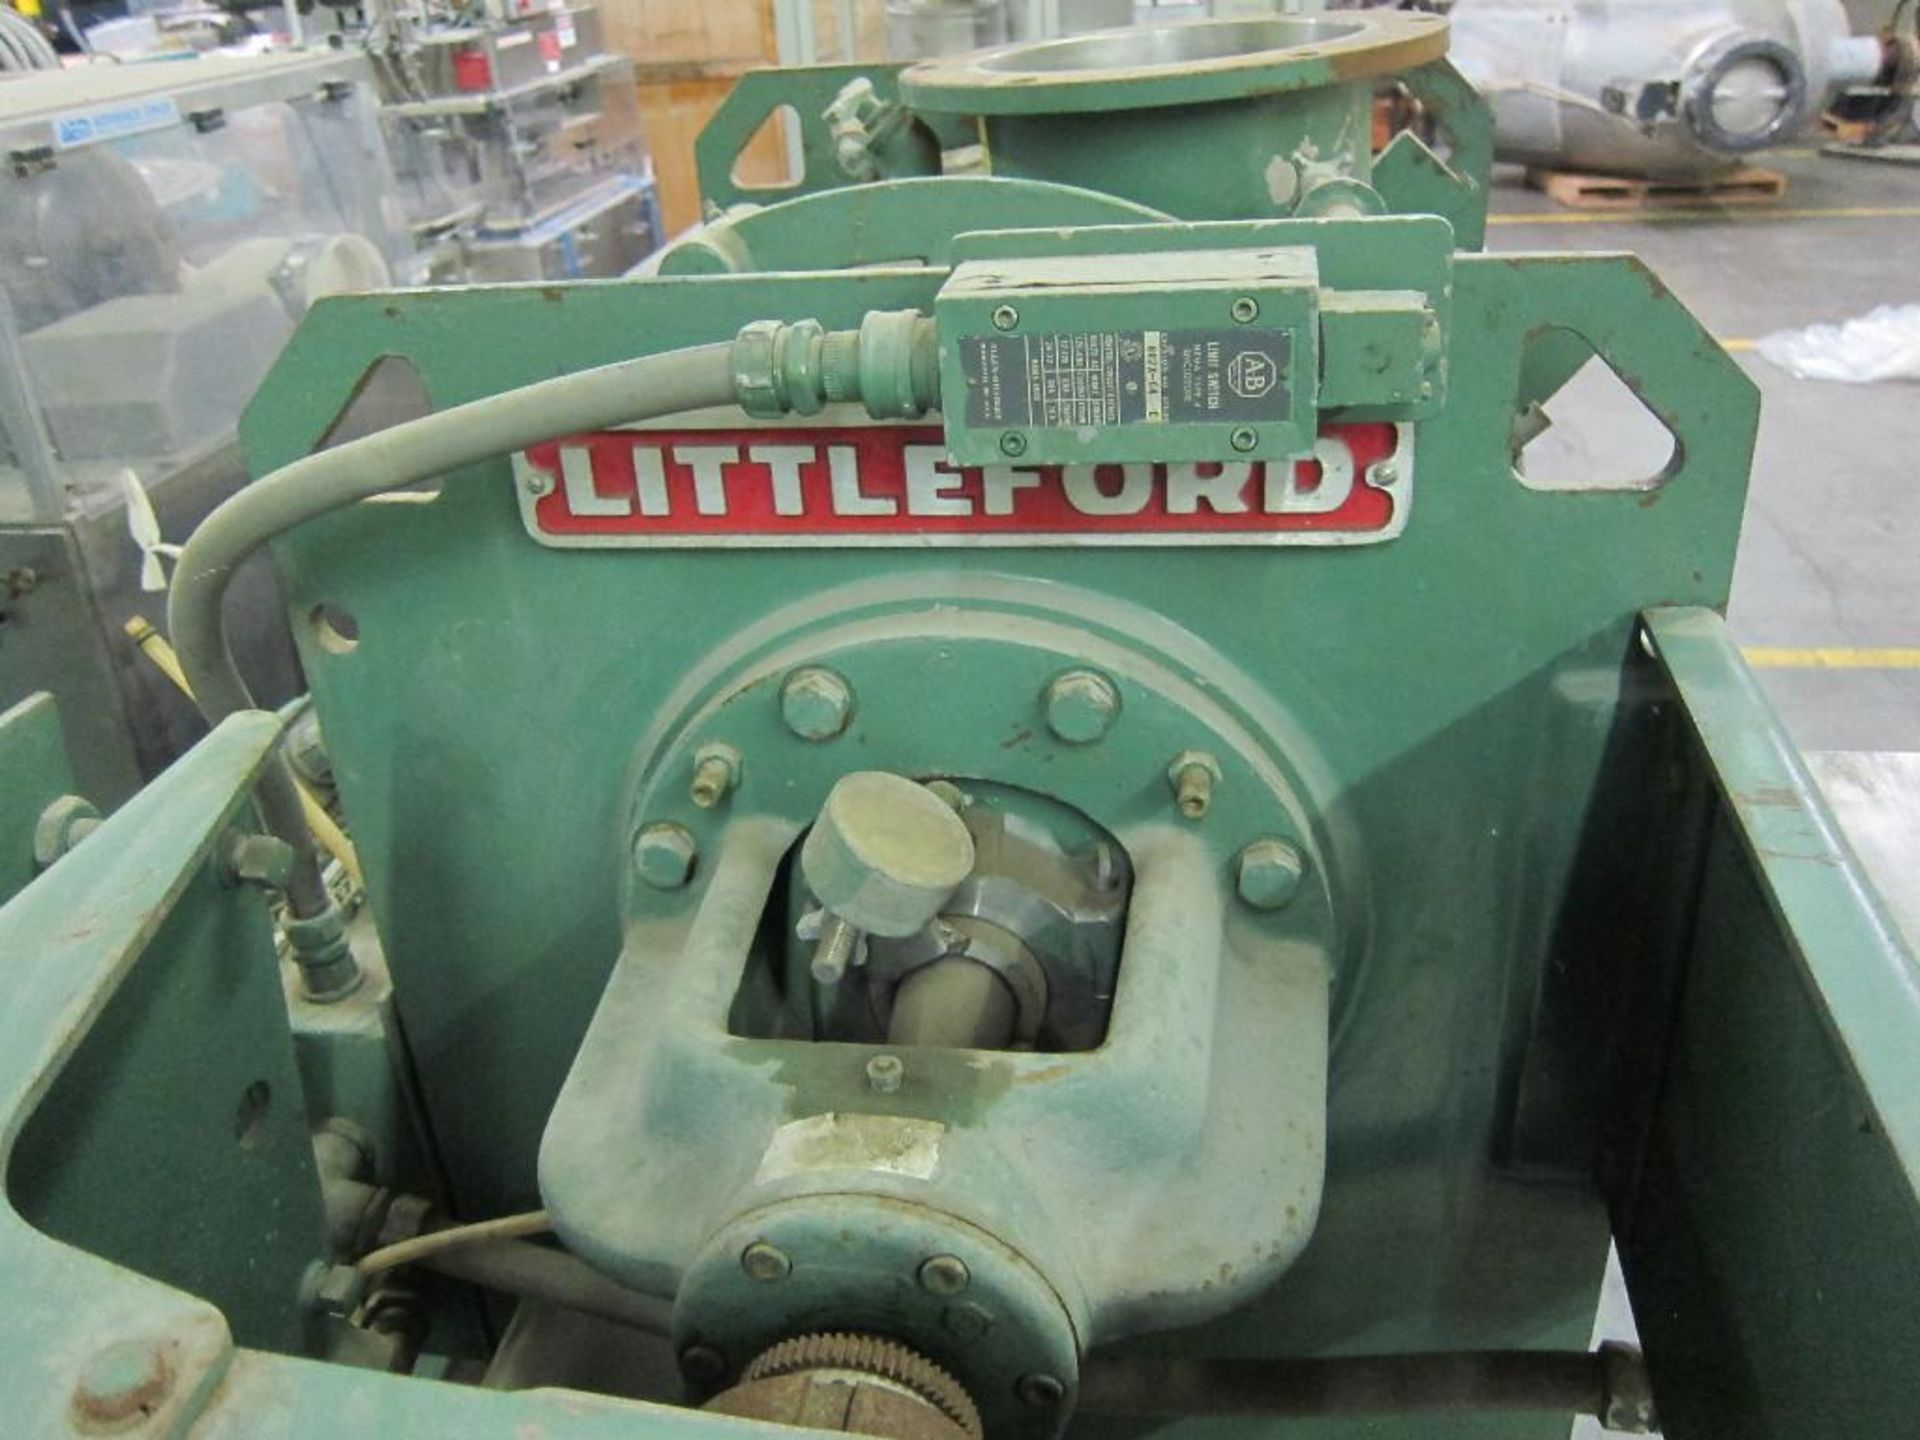 Littleford Day 130 Liter Stainless Steel High Intensity Mixer - Image 4 of 13